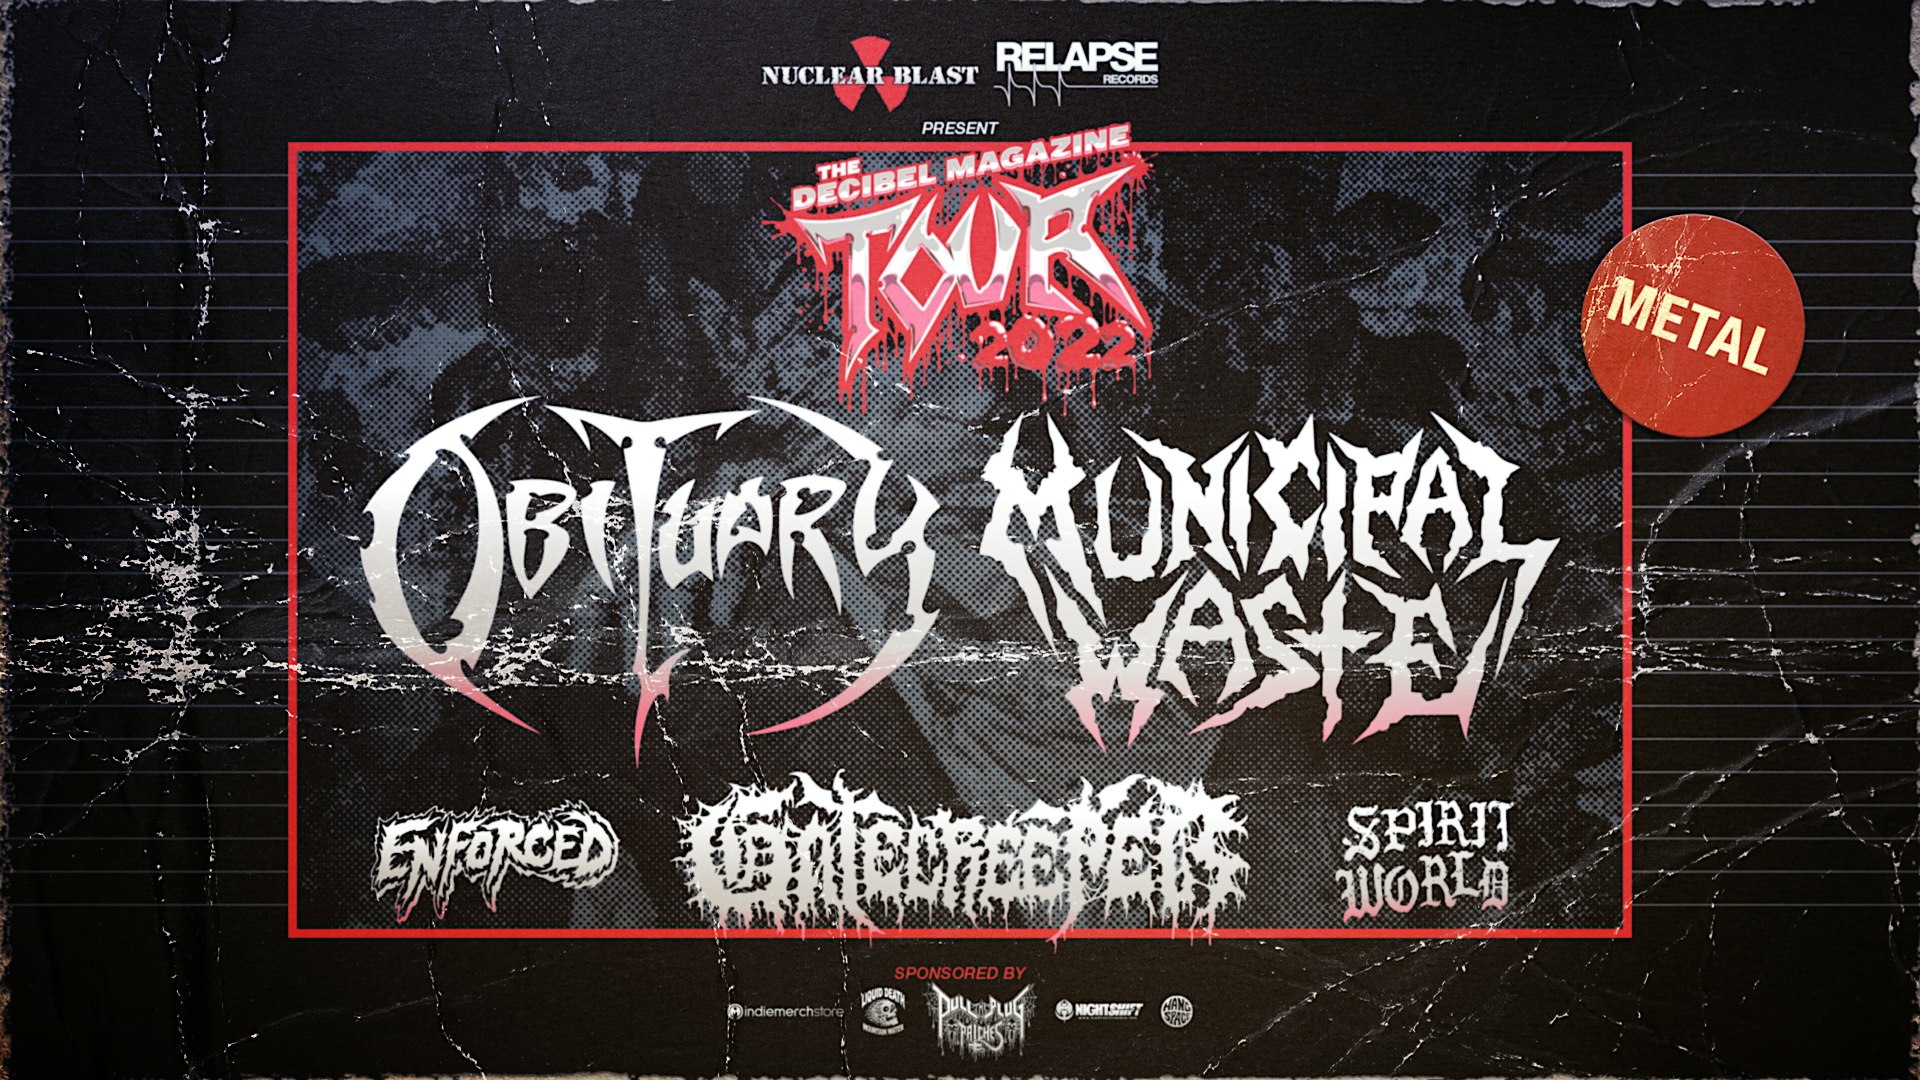 The 2022 Decibel Magazine Tour with Obituary, Municipal Waste, Enforced, Gatecreeper, & Spiritworld in Tampa at the Orpheum